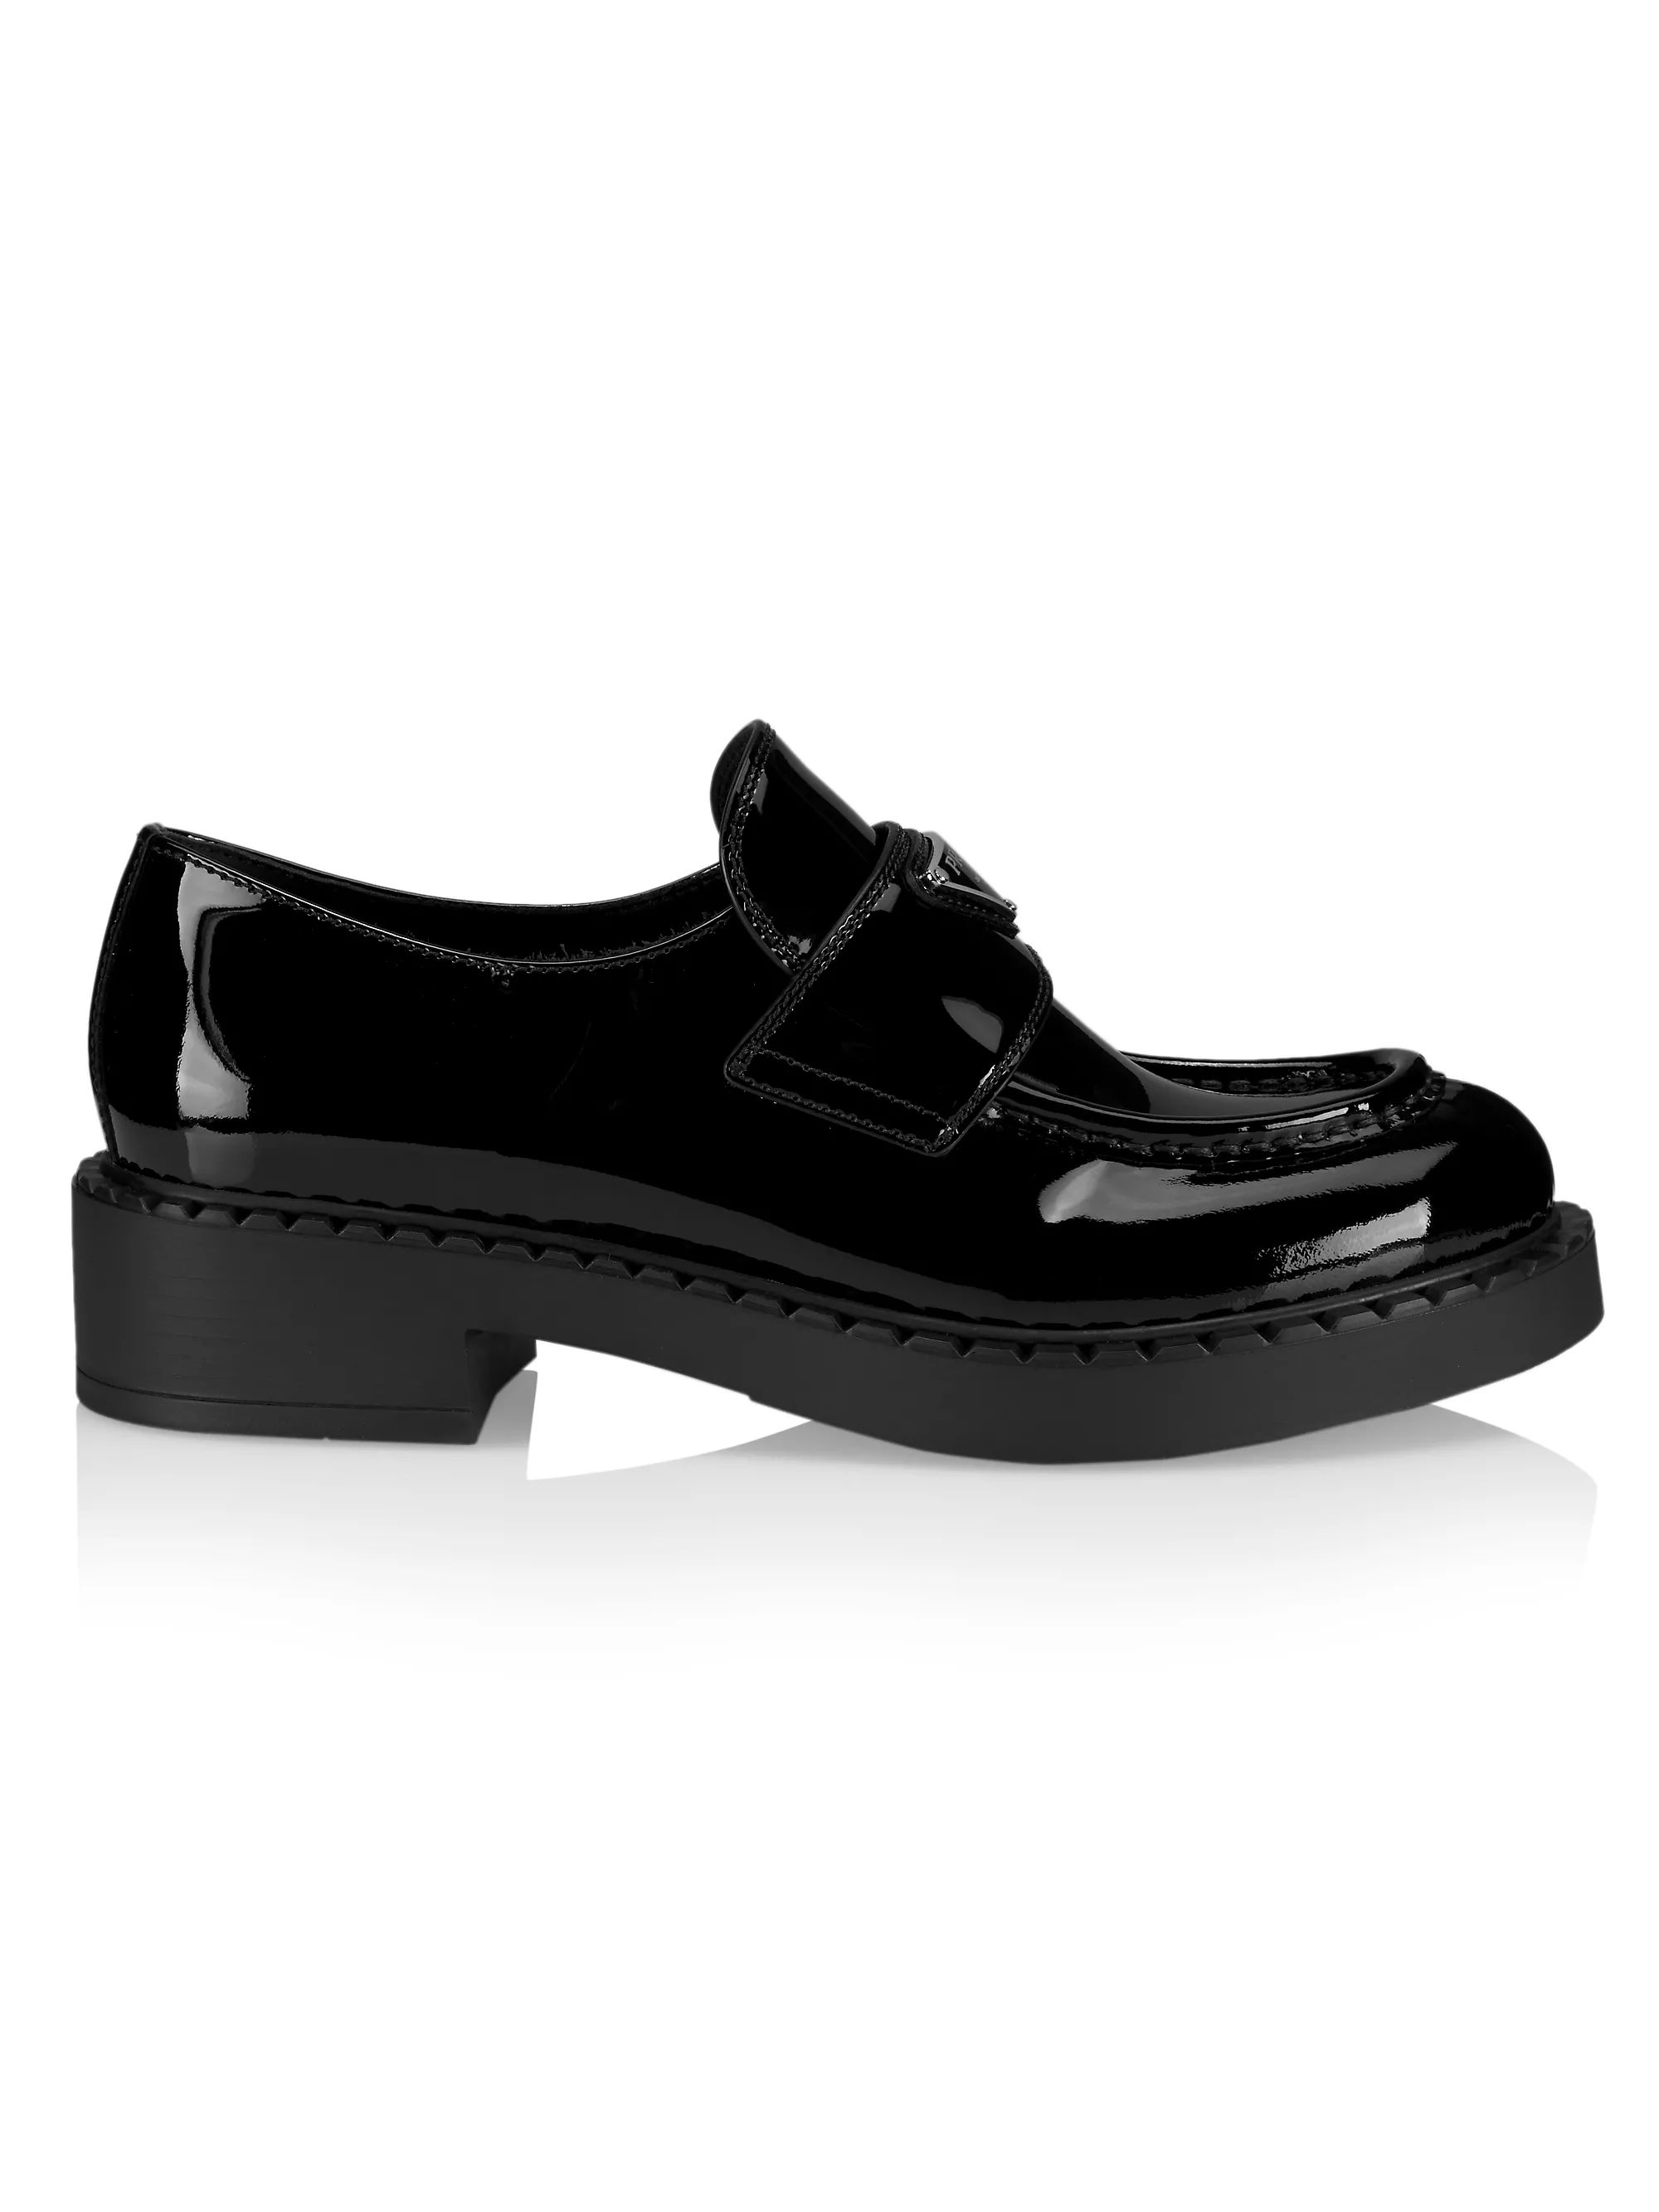 Triangle Logo Patent Leather Loafers | Saks Fifth Avenue